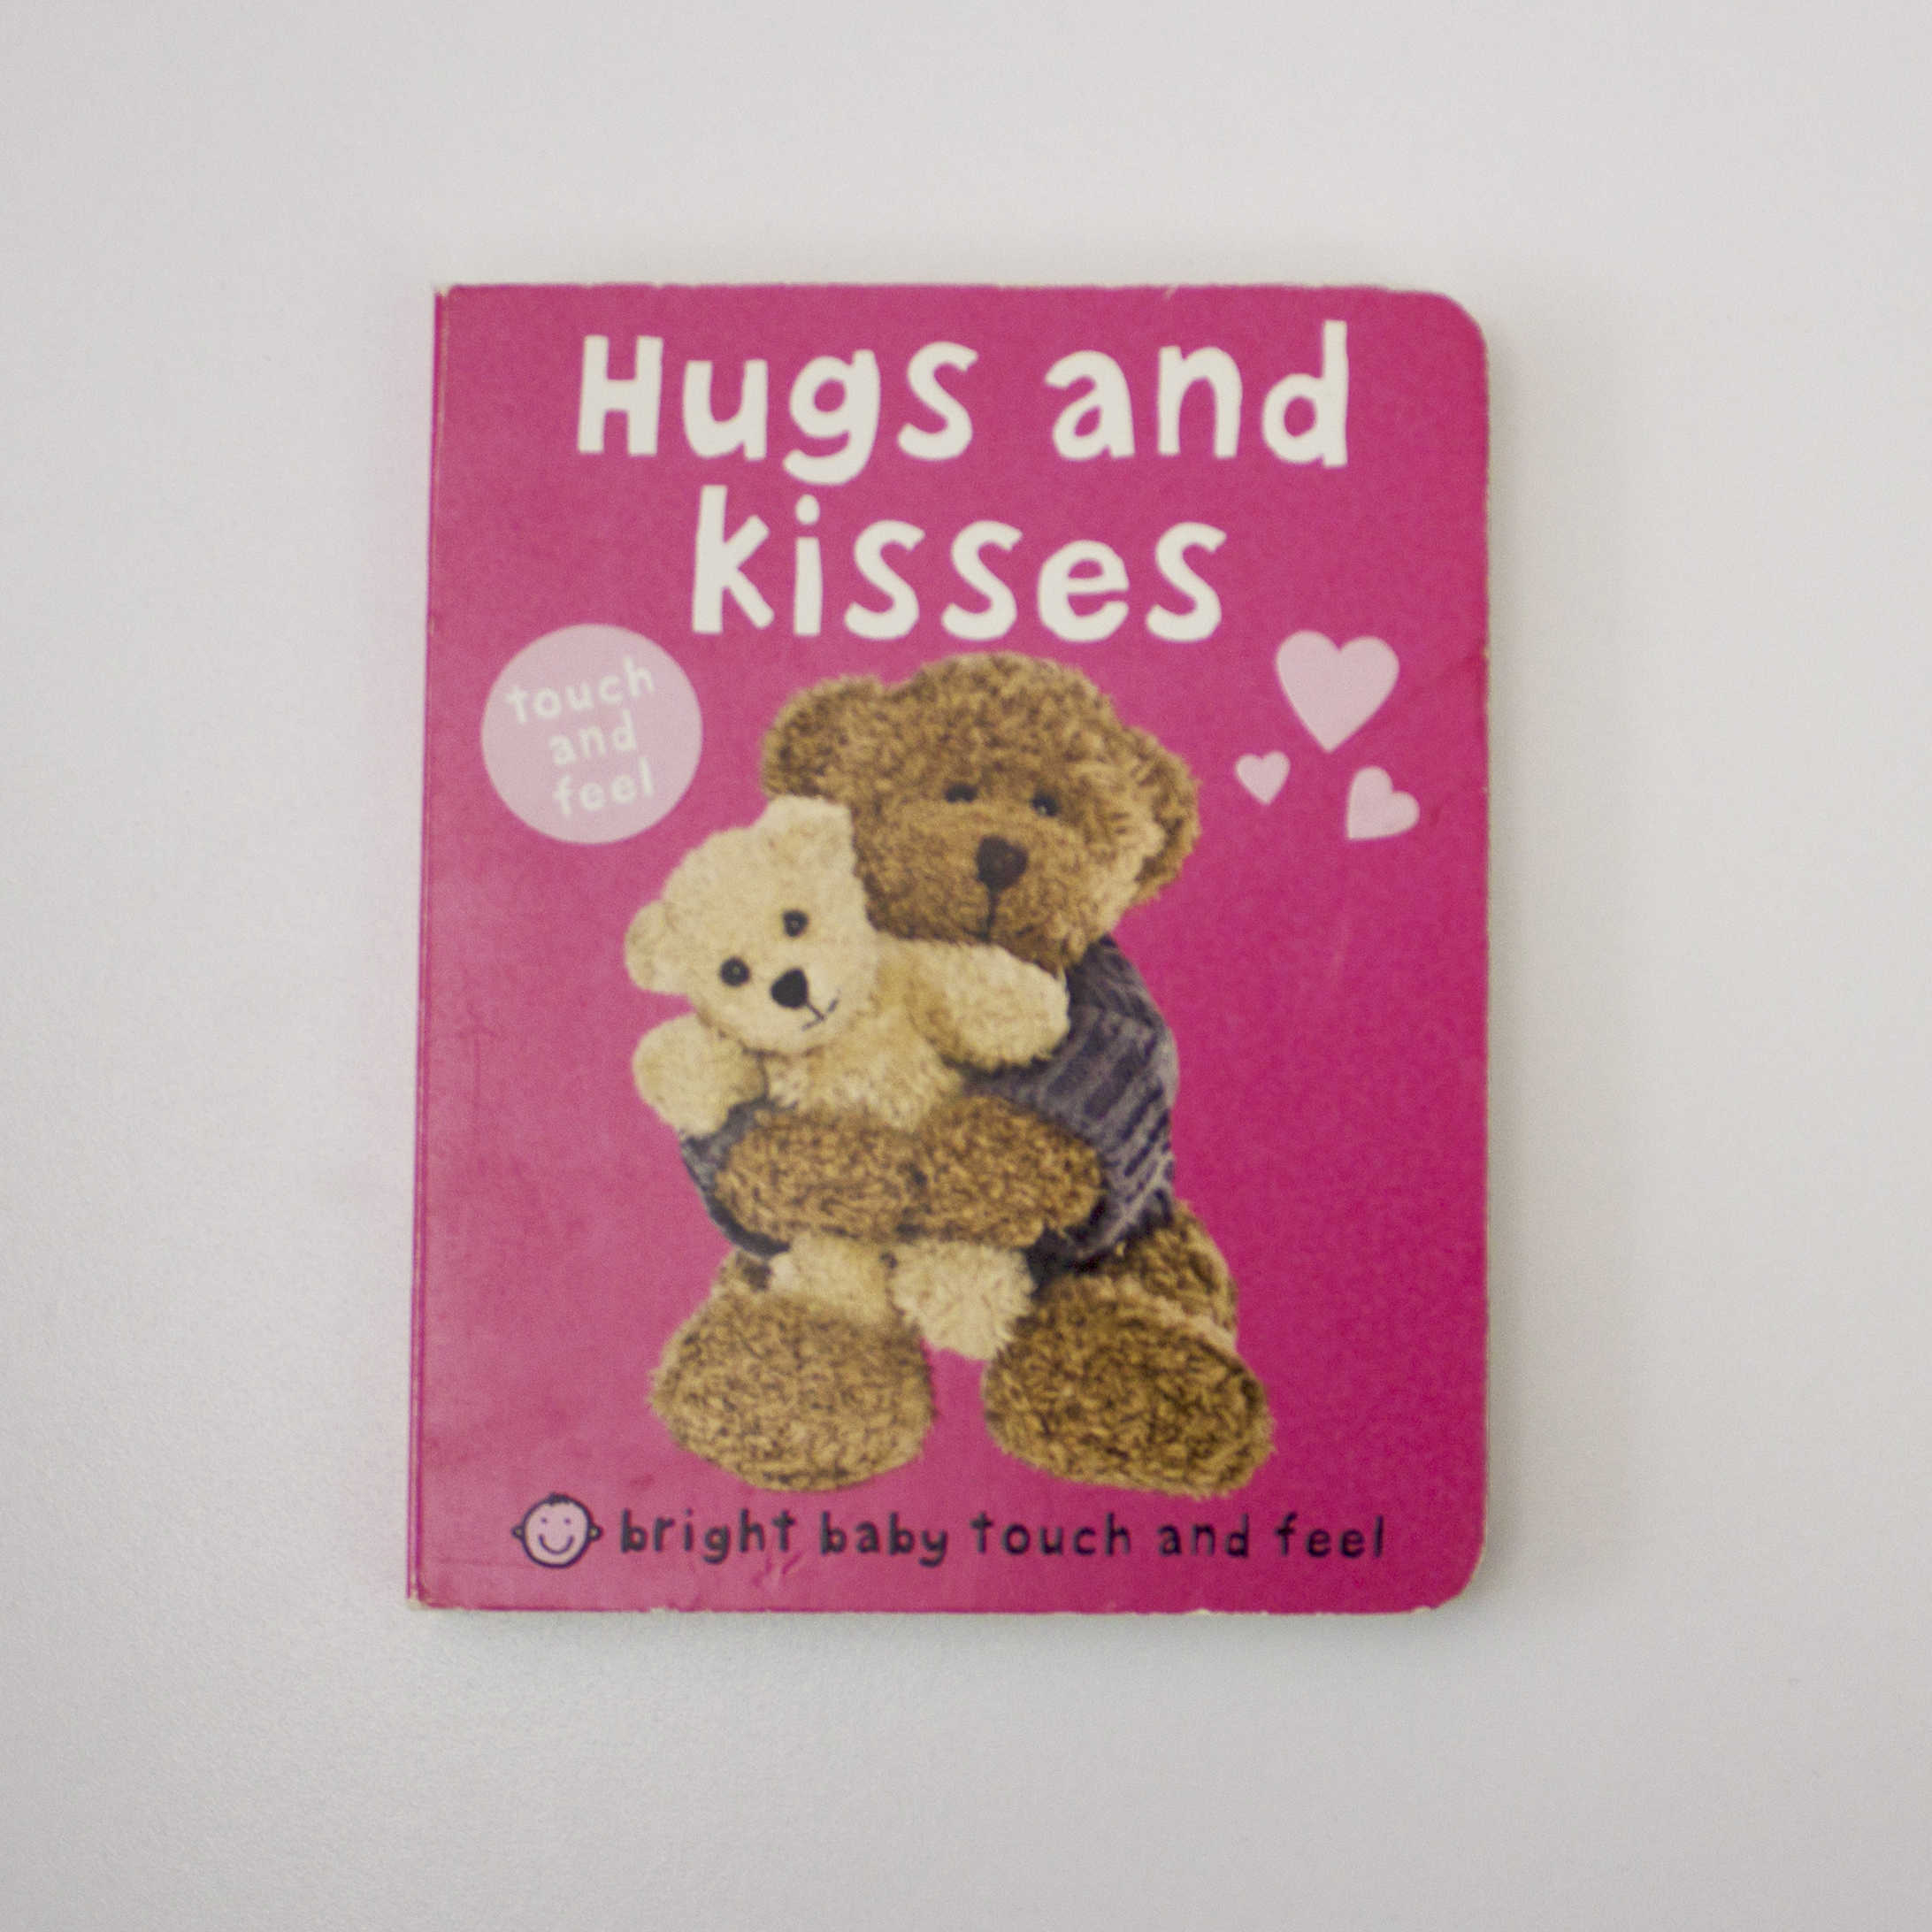 hugs and kisses book cover